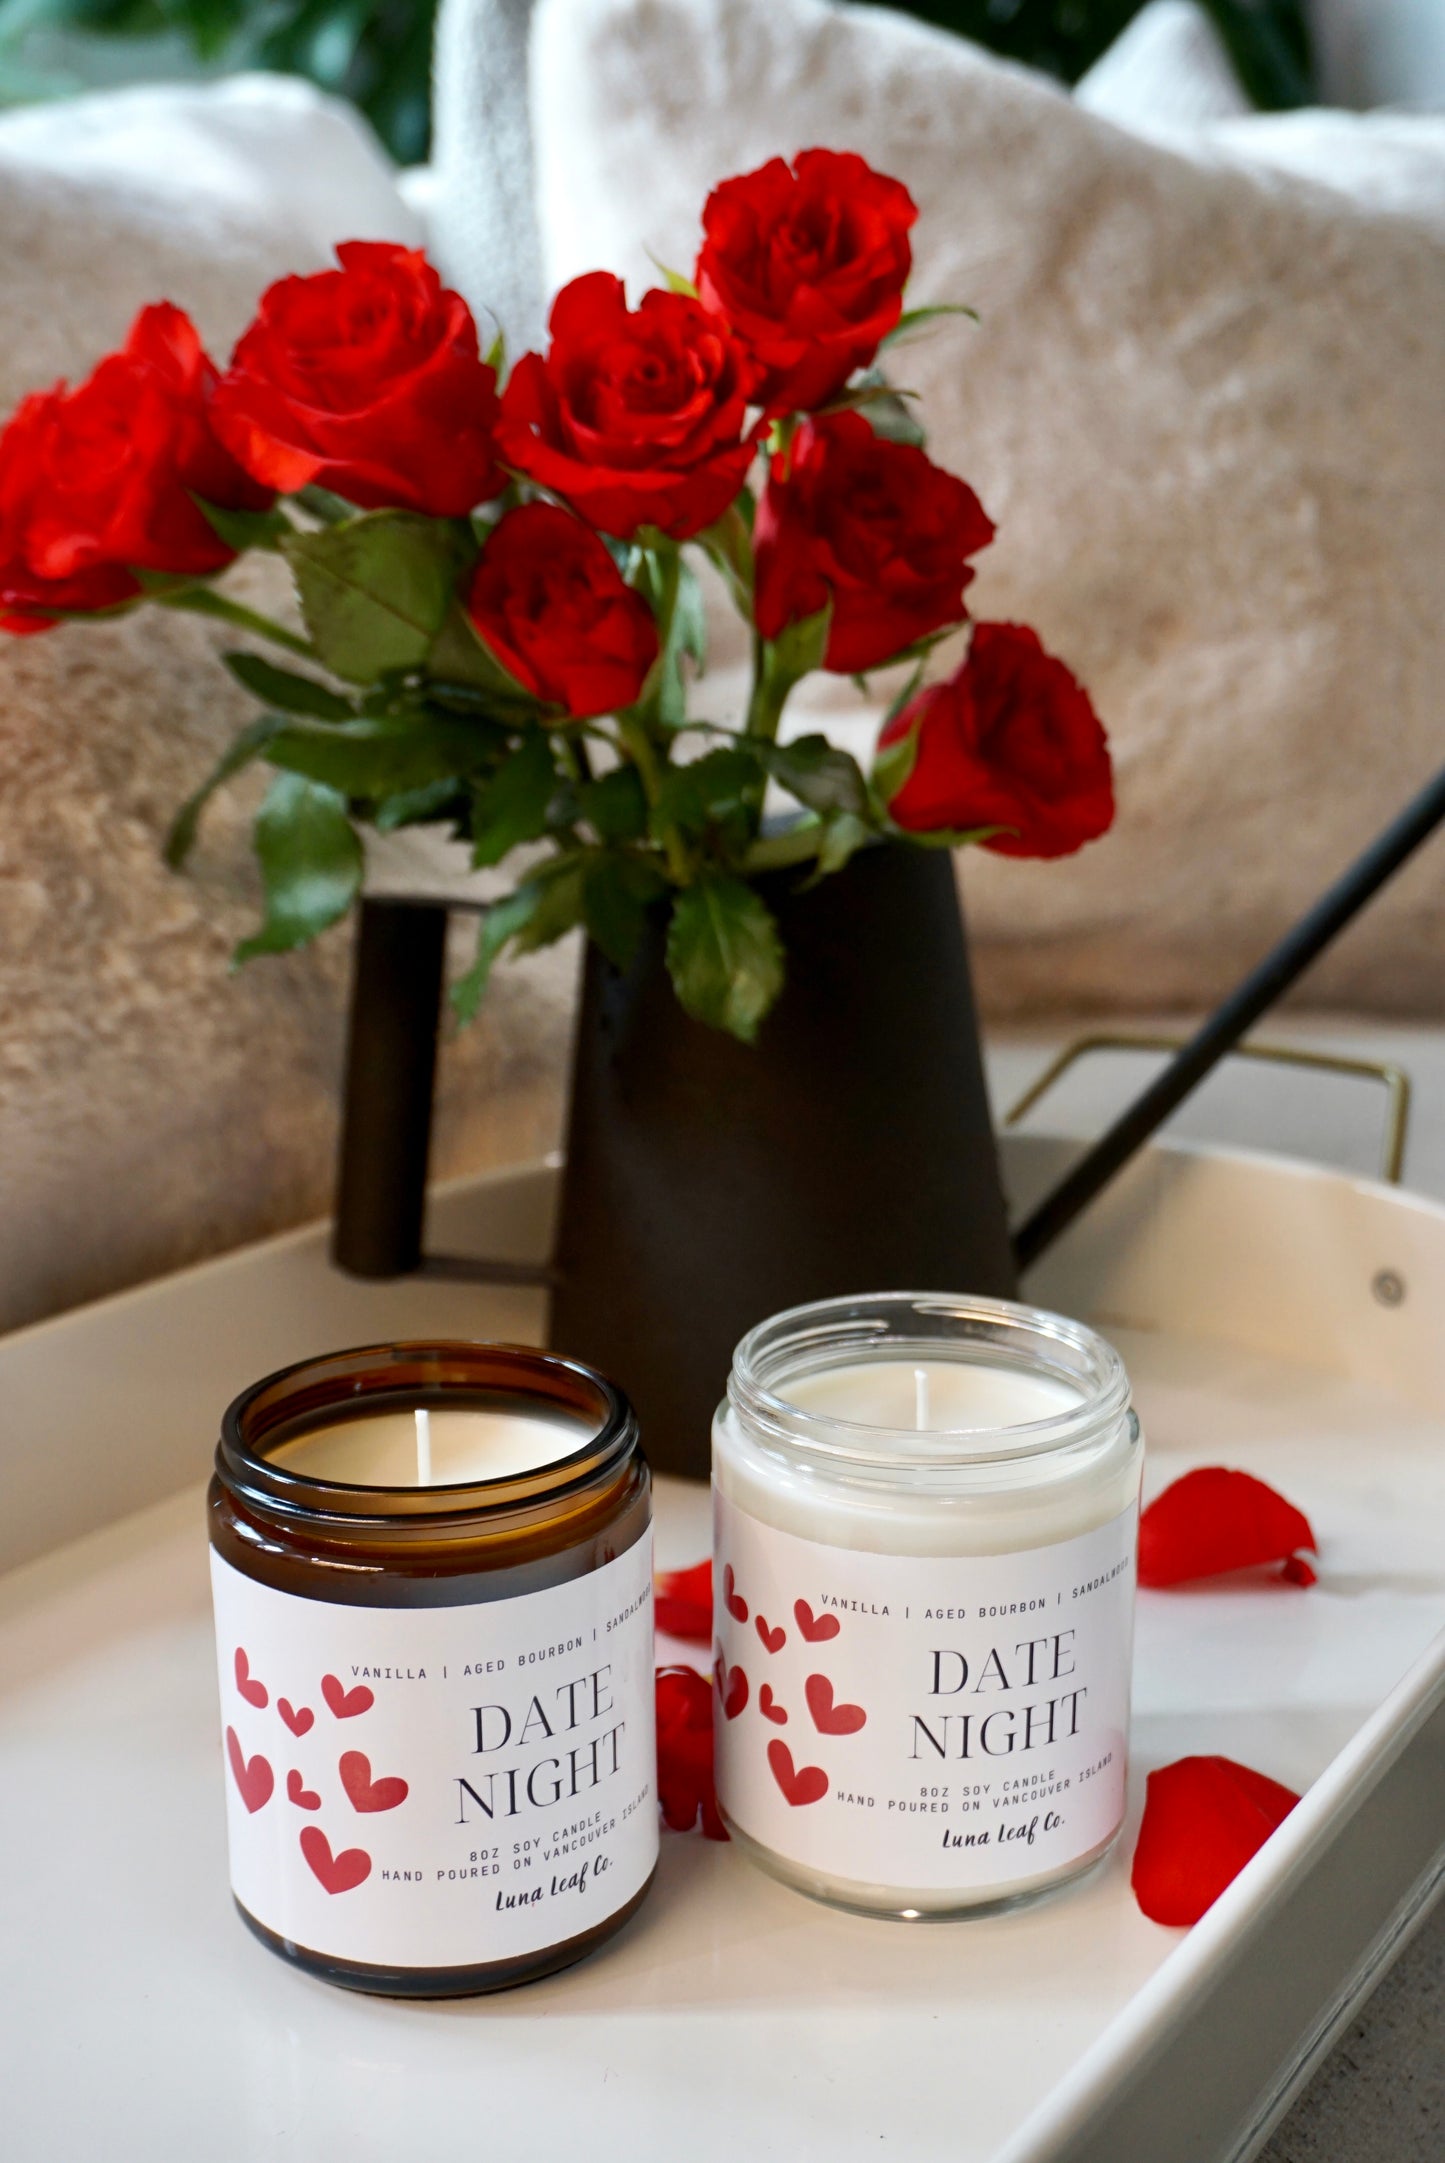 Date Night Soy Candle